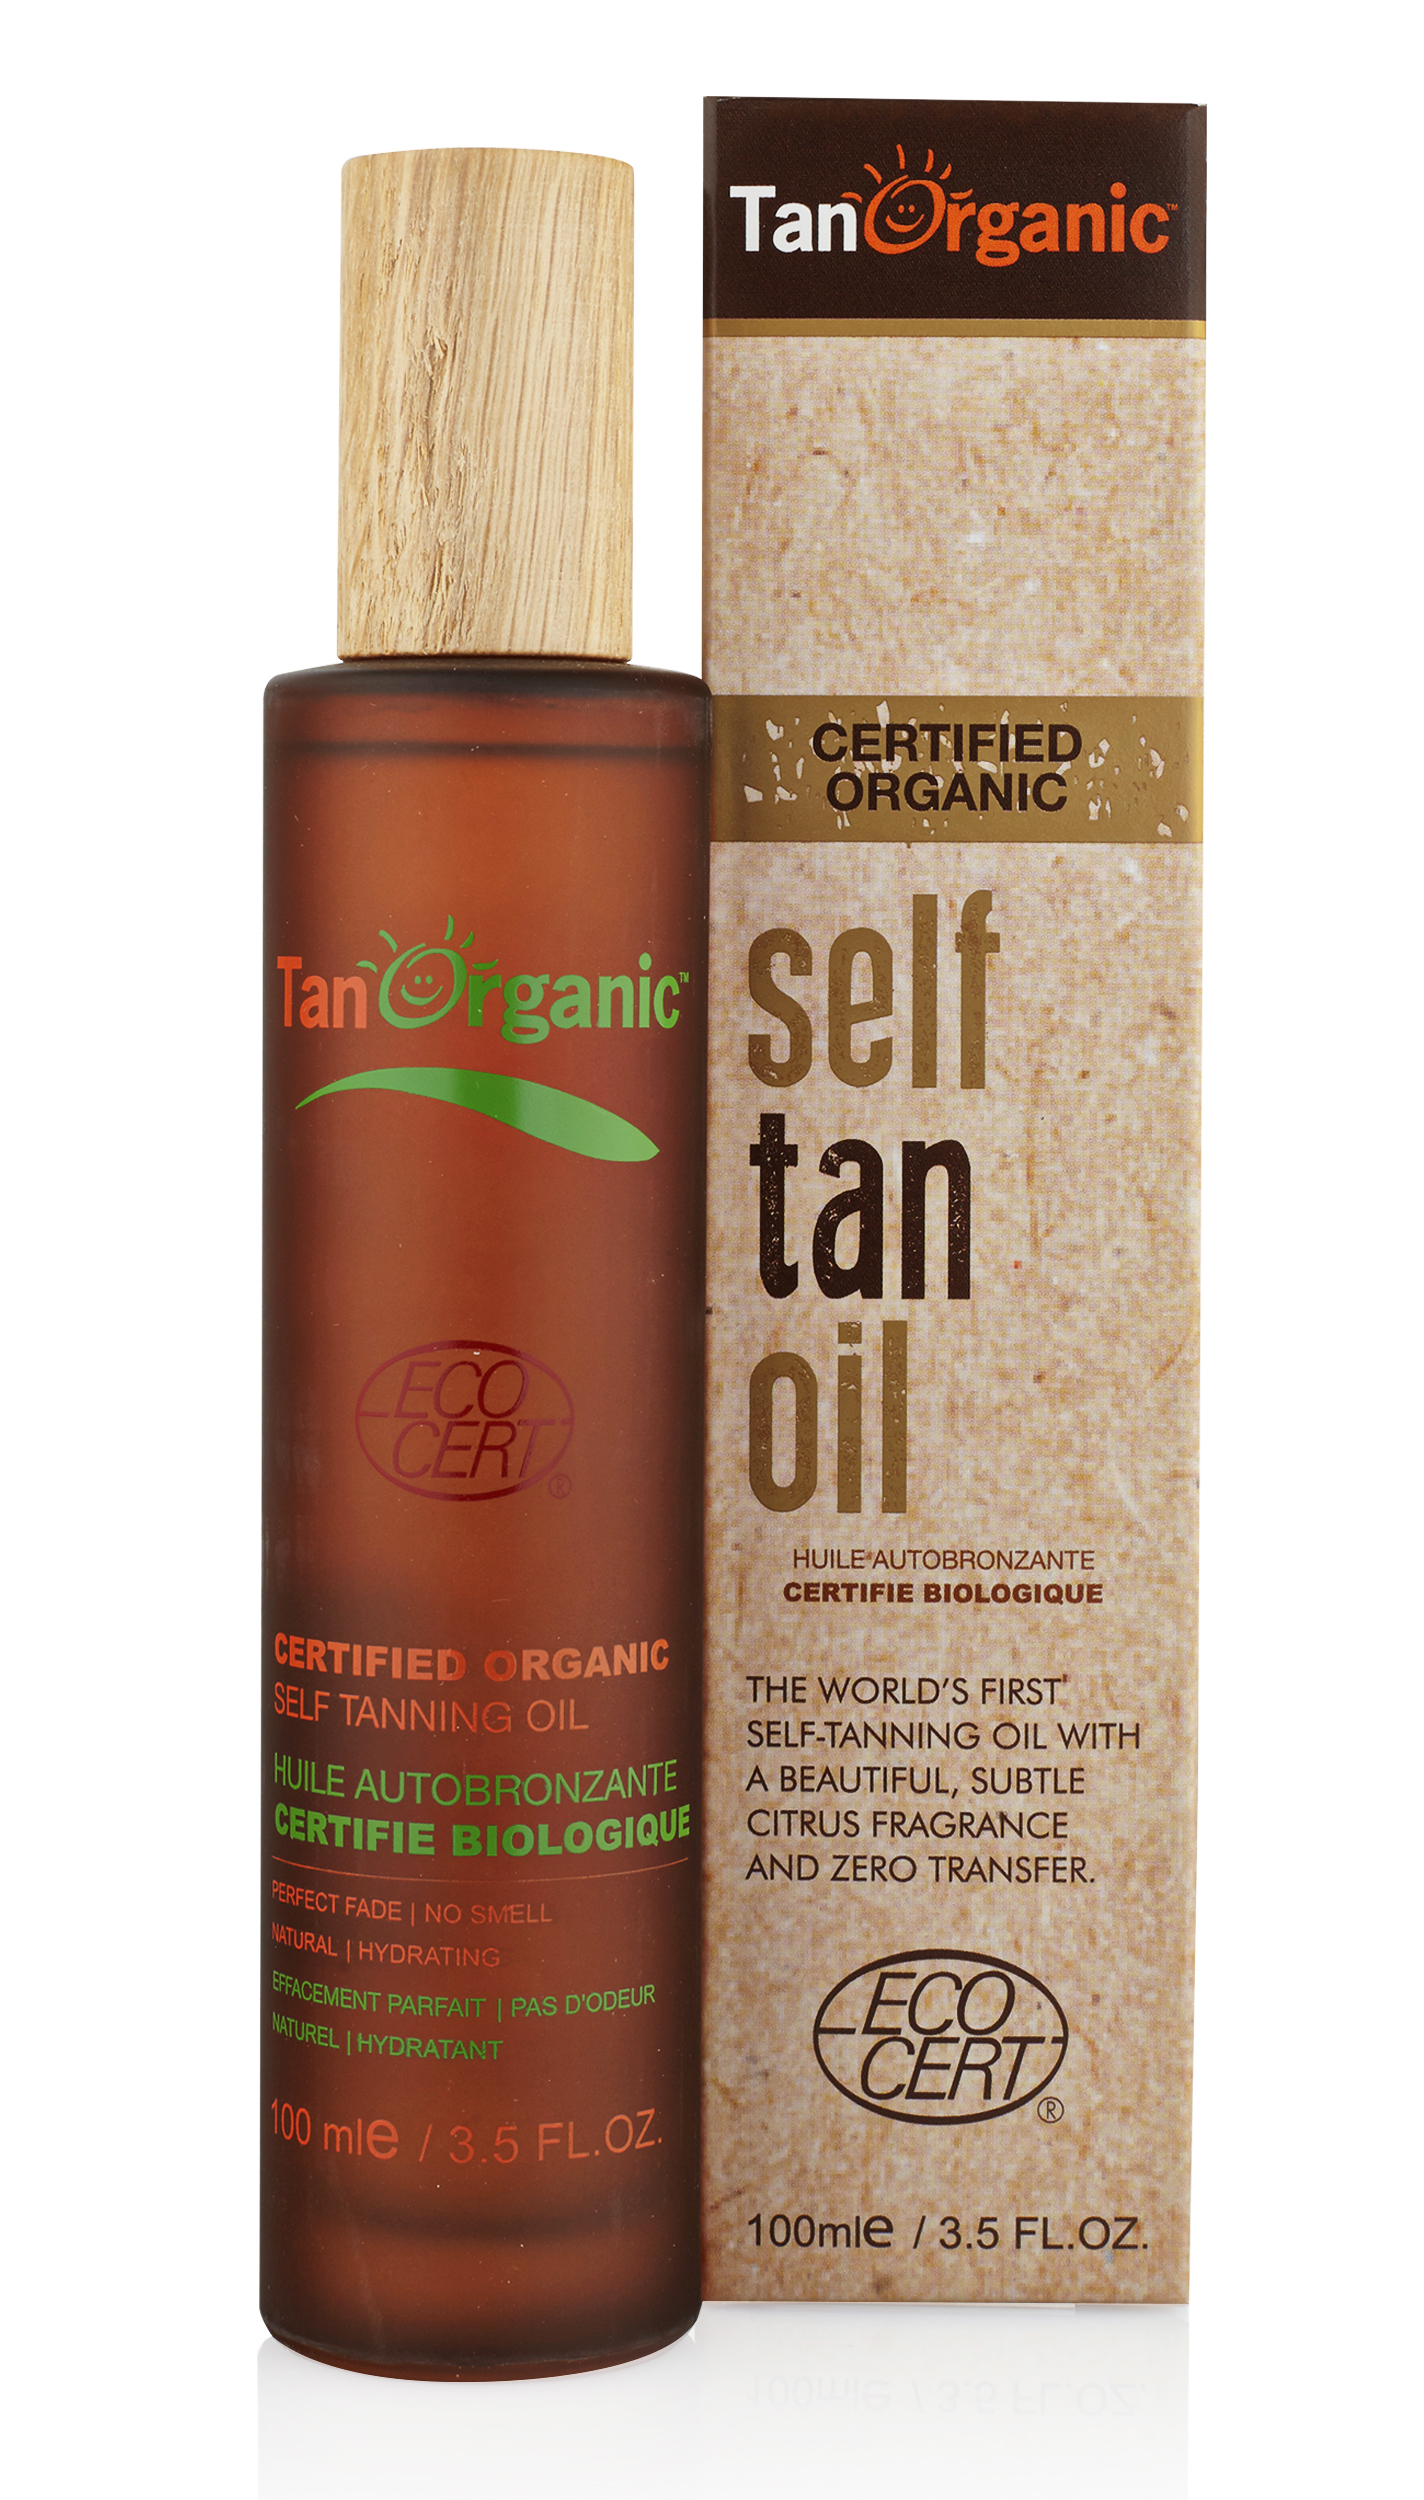 Self Tanning Oil by TanOrganic